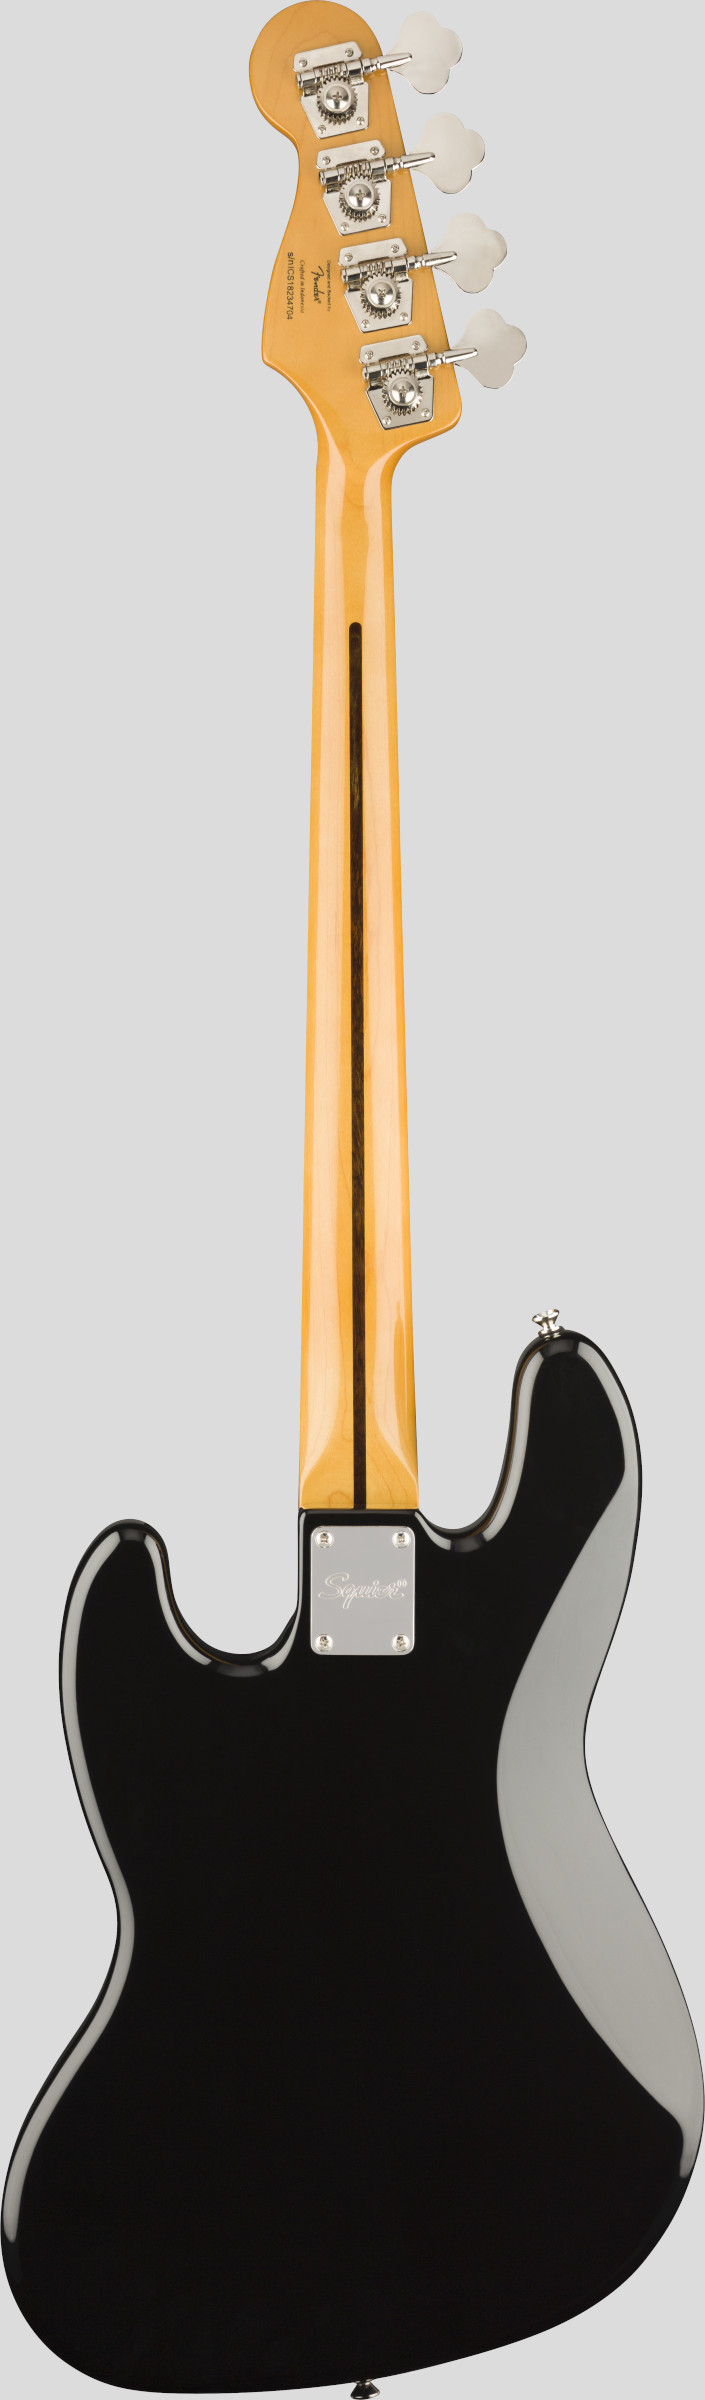 Squier by Fender Classic Vibe 60 Jazz Bass Black 2